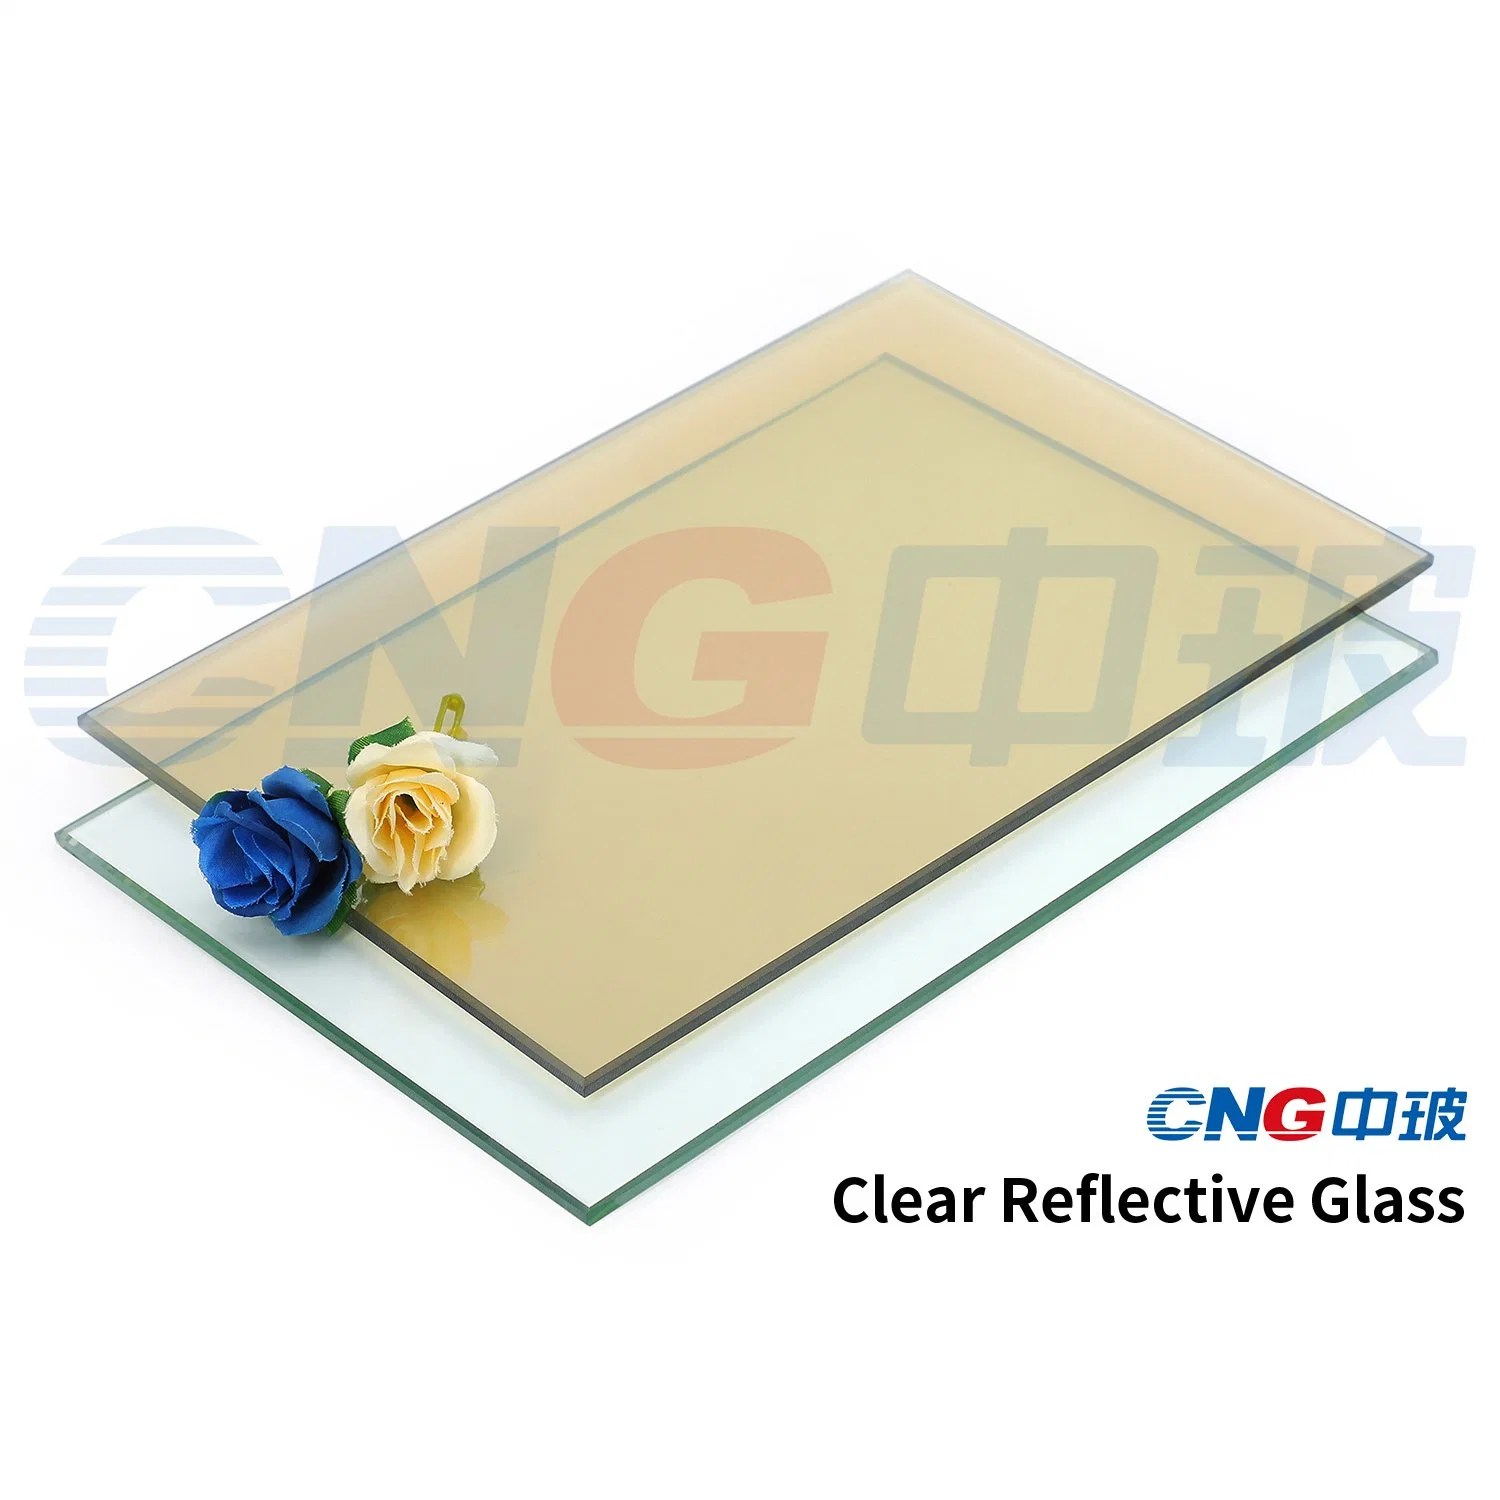 Reflective /Float /Toughened/Laminated/Tinted/Pattern/Tempered/ Glass/Building Glass for Building Window/Door